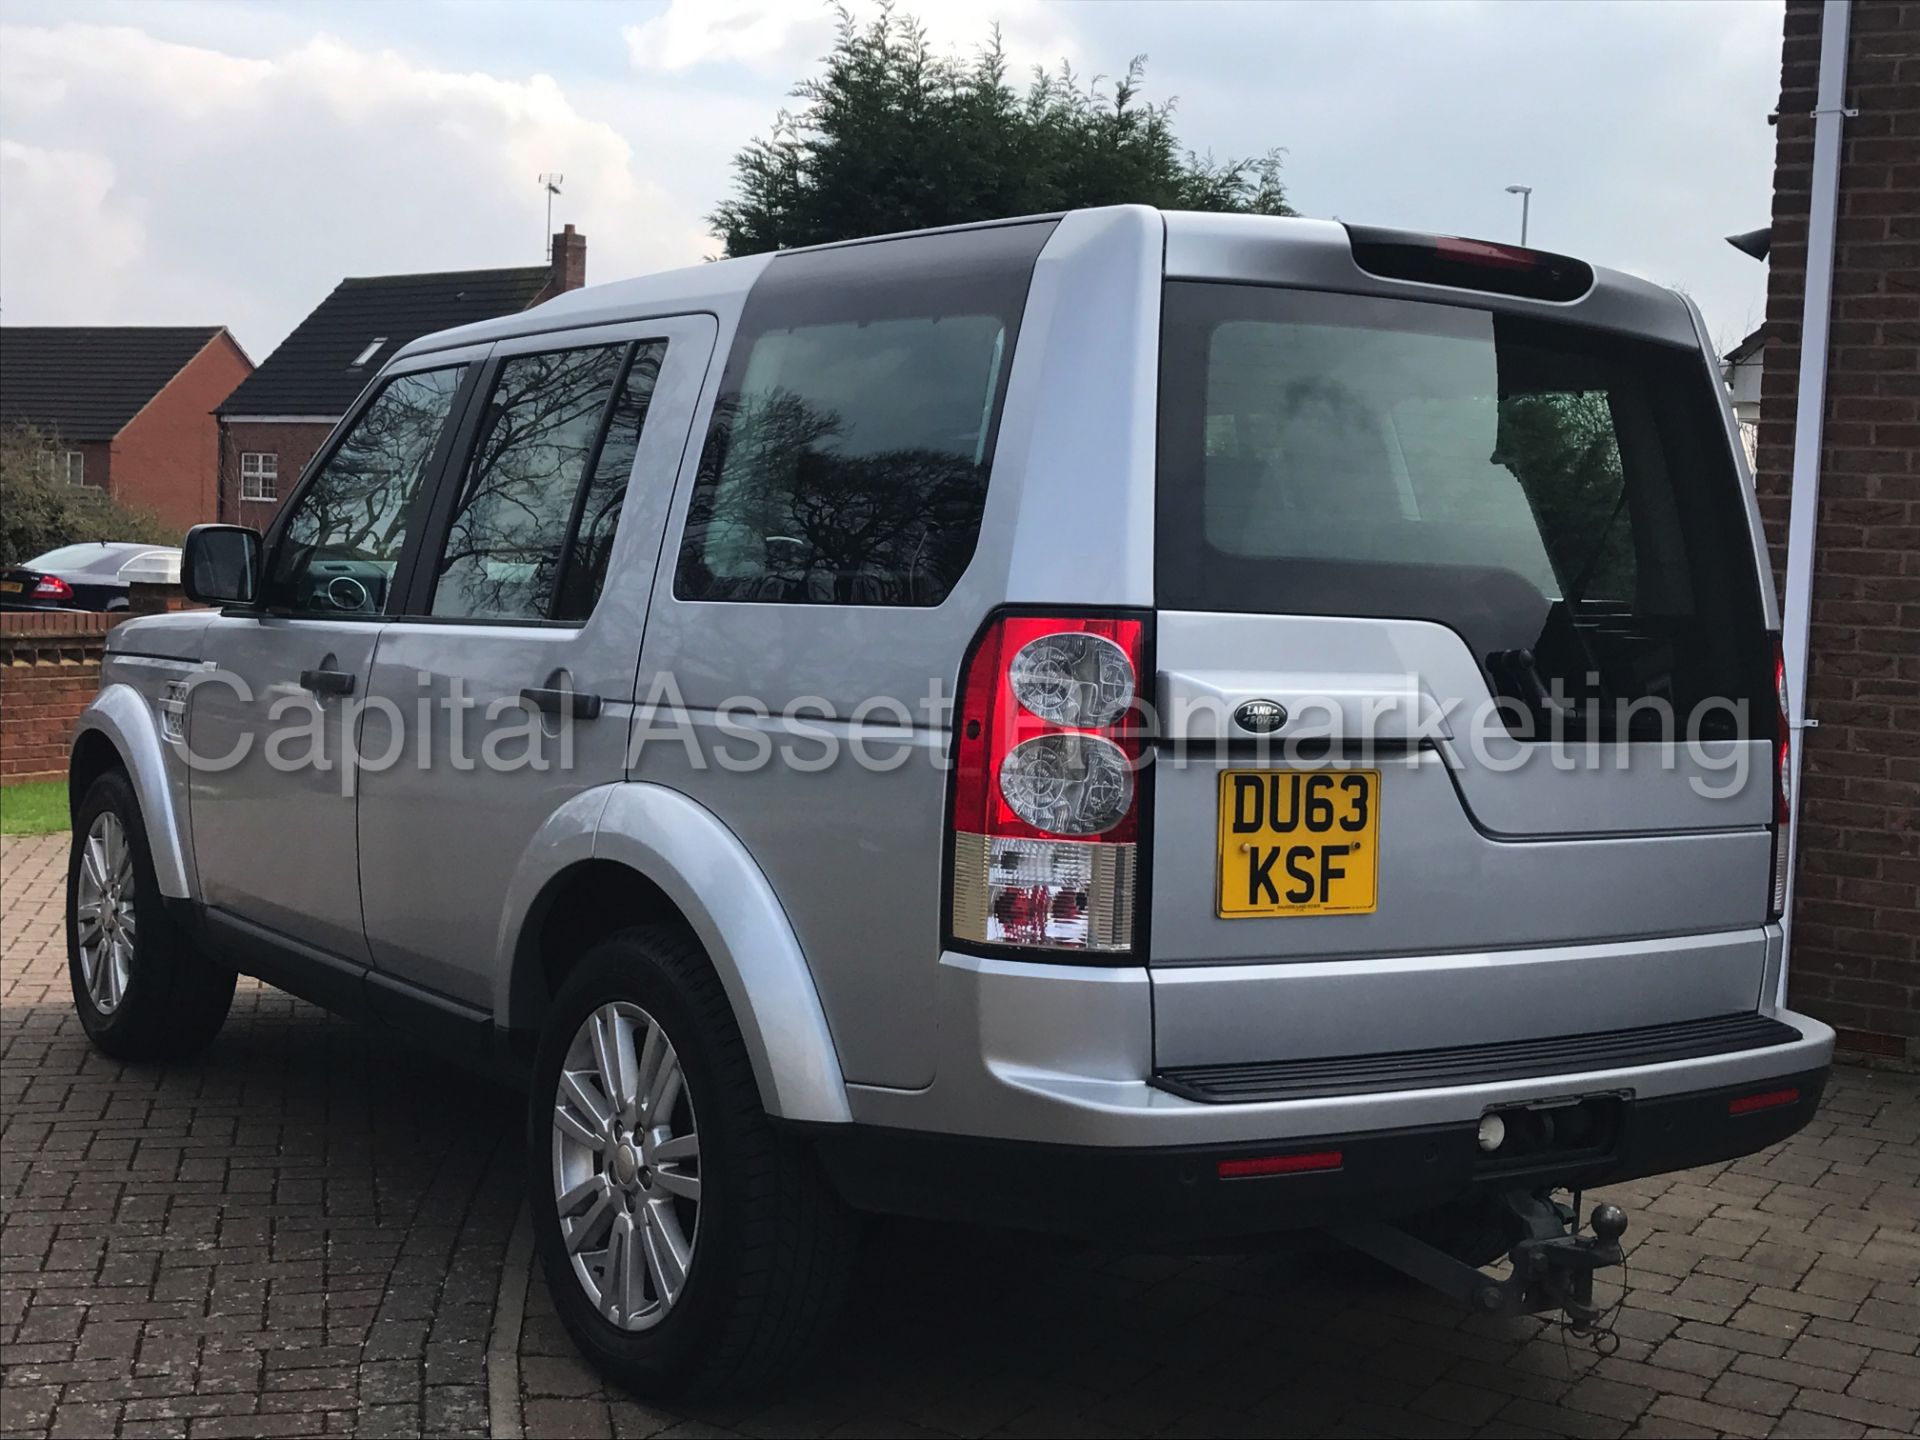 LAND ROVER DISCOVERY 4 (2014 MODEL) '3.0 SDV6 - 8 SPEED AUTO - 7 SEATER' **HUGE SPEC** (1 OWNER) - Image 3 of 30